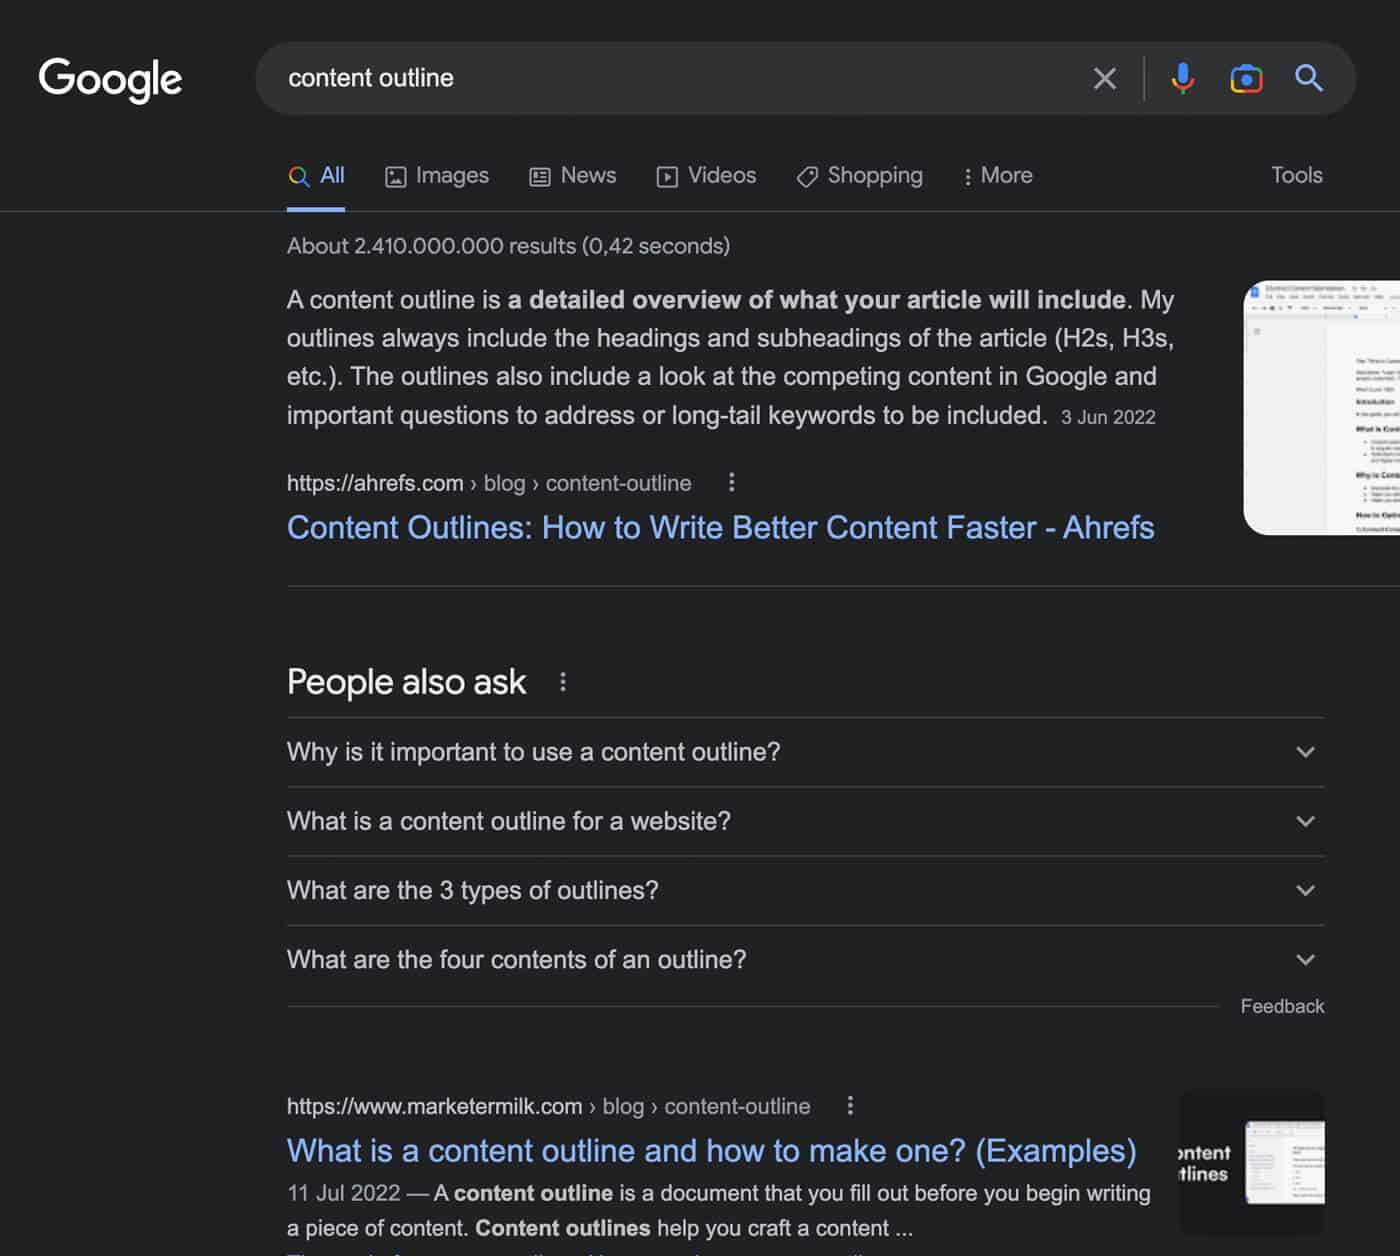 Content Outline - Google SERP People Also Ask Box